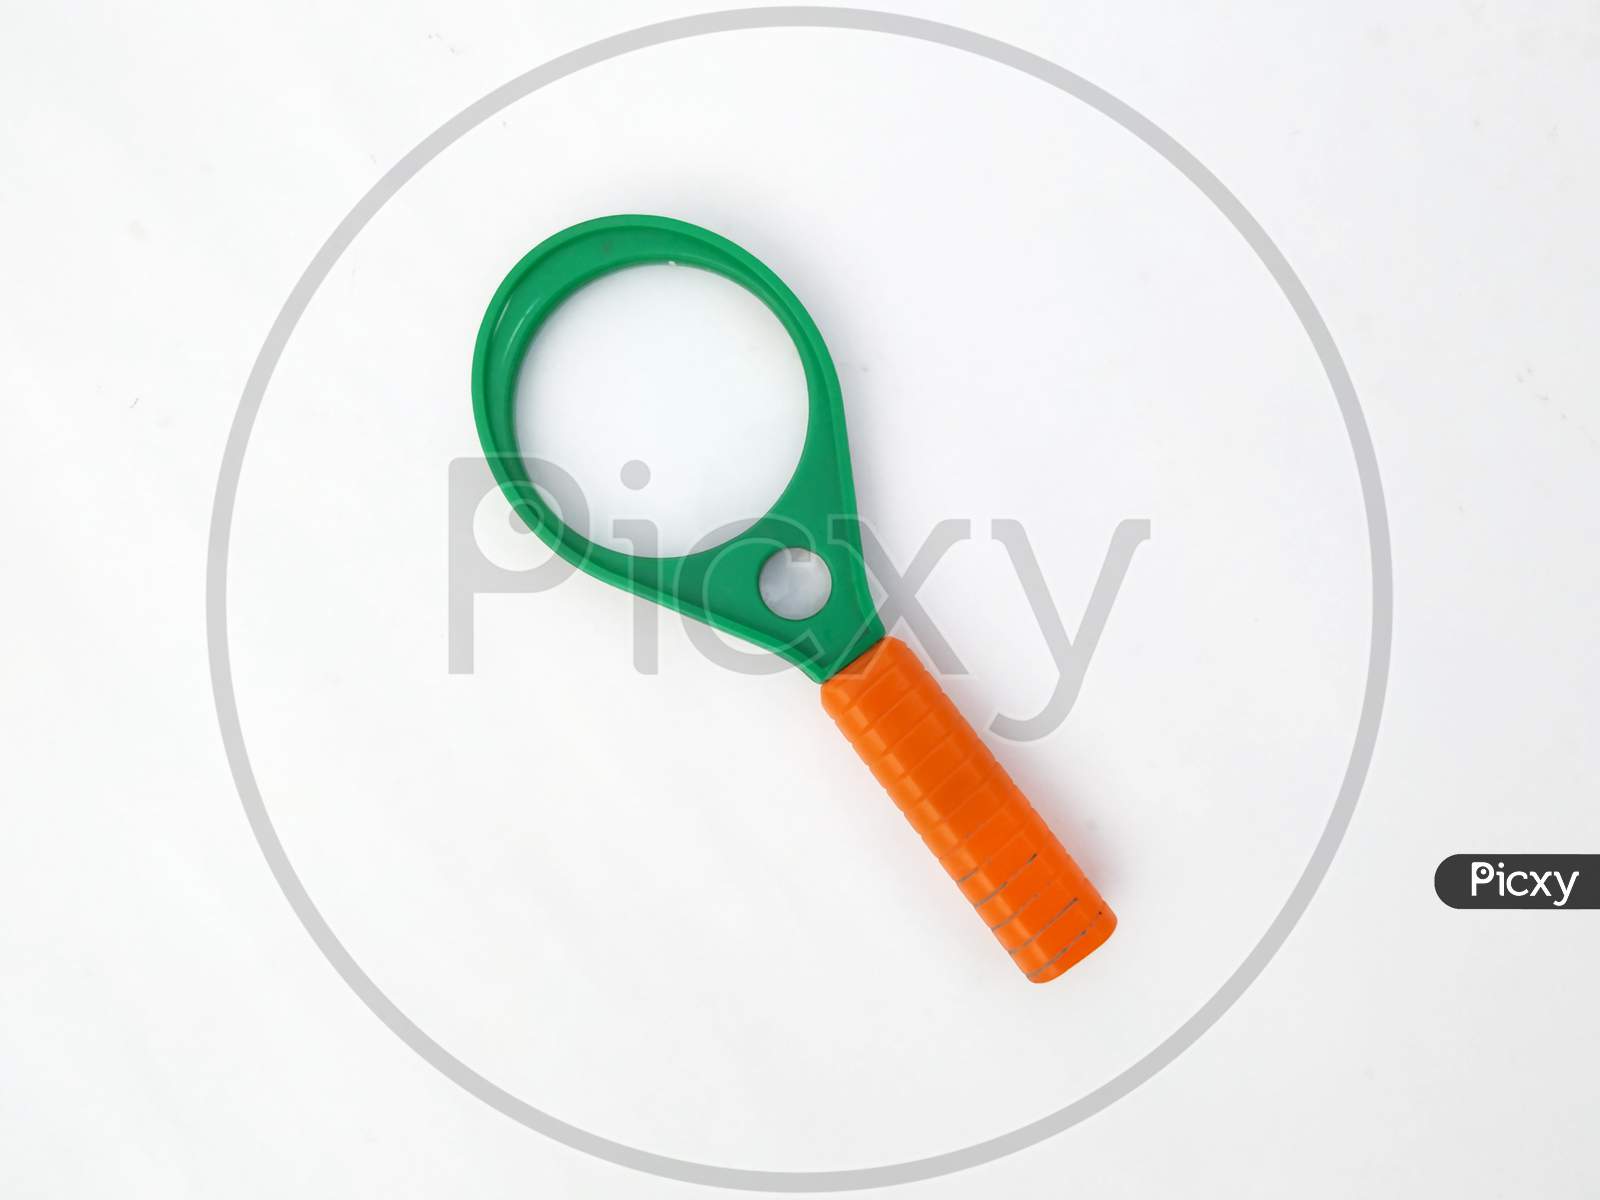 green Magnifying glass isolated on white background